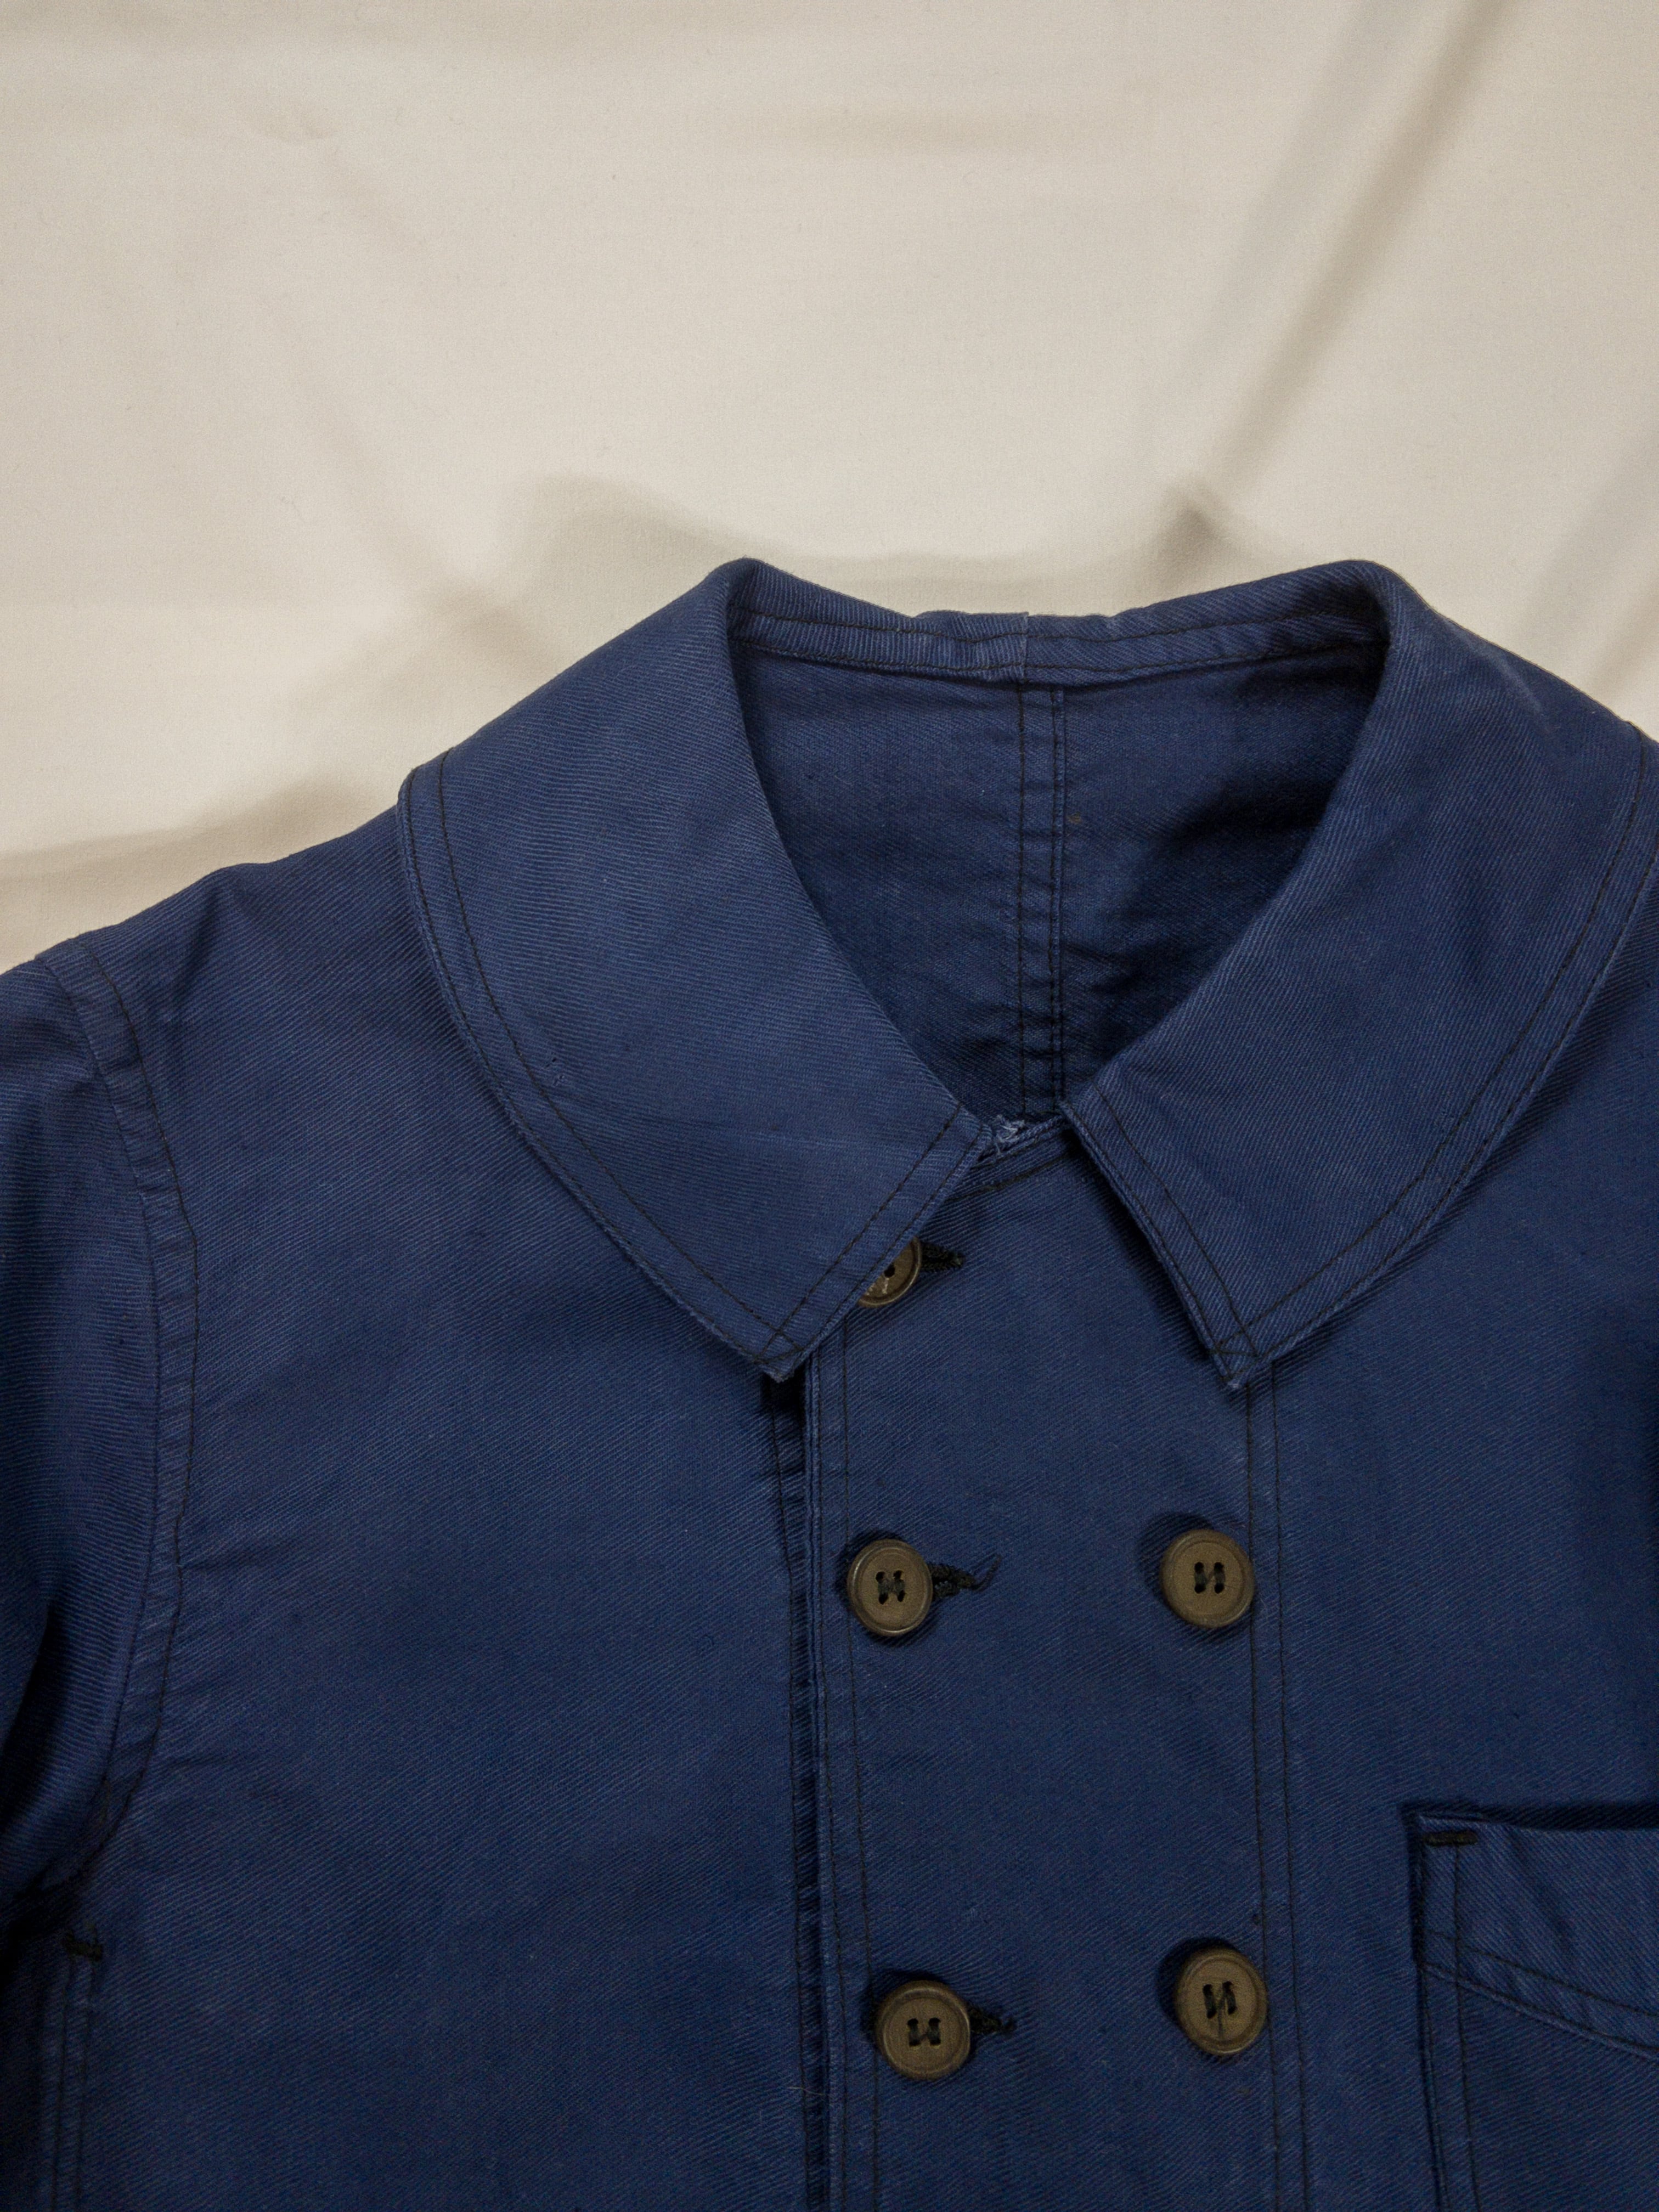 1930s】French Work Cotton Twill Double Breasted Jacket, with All